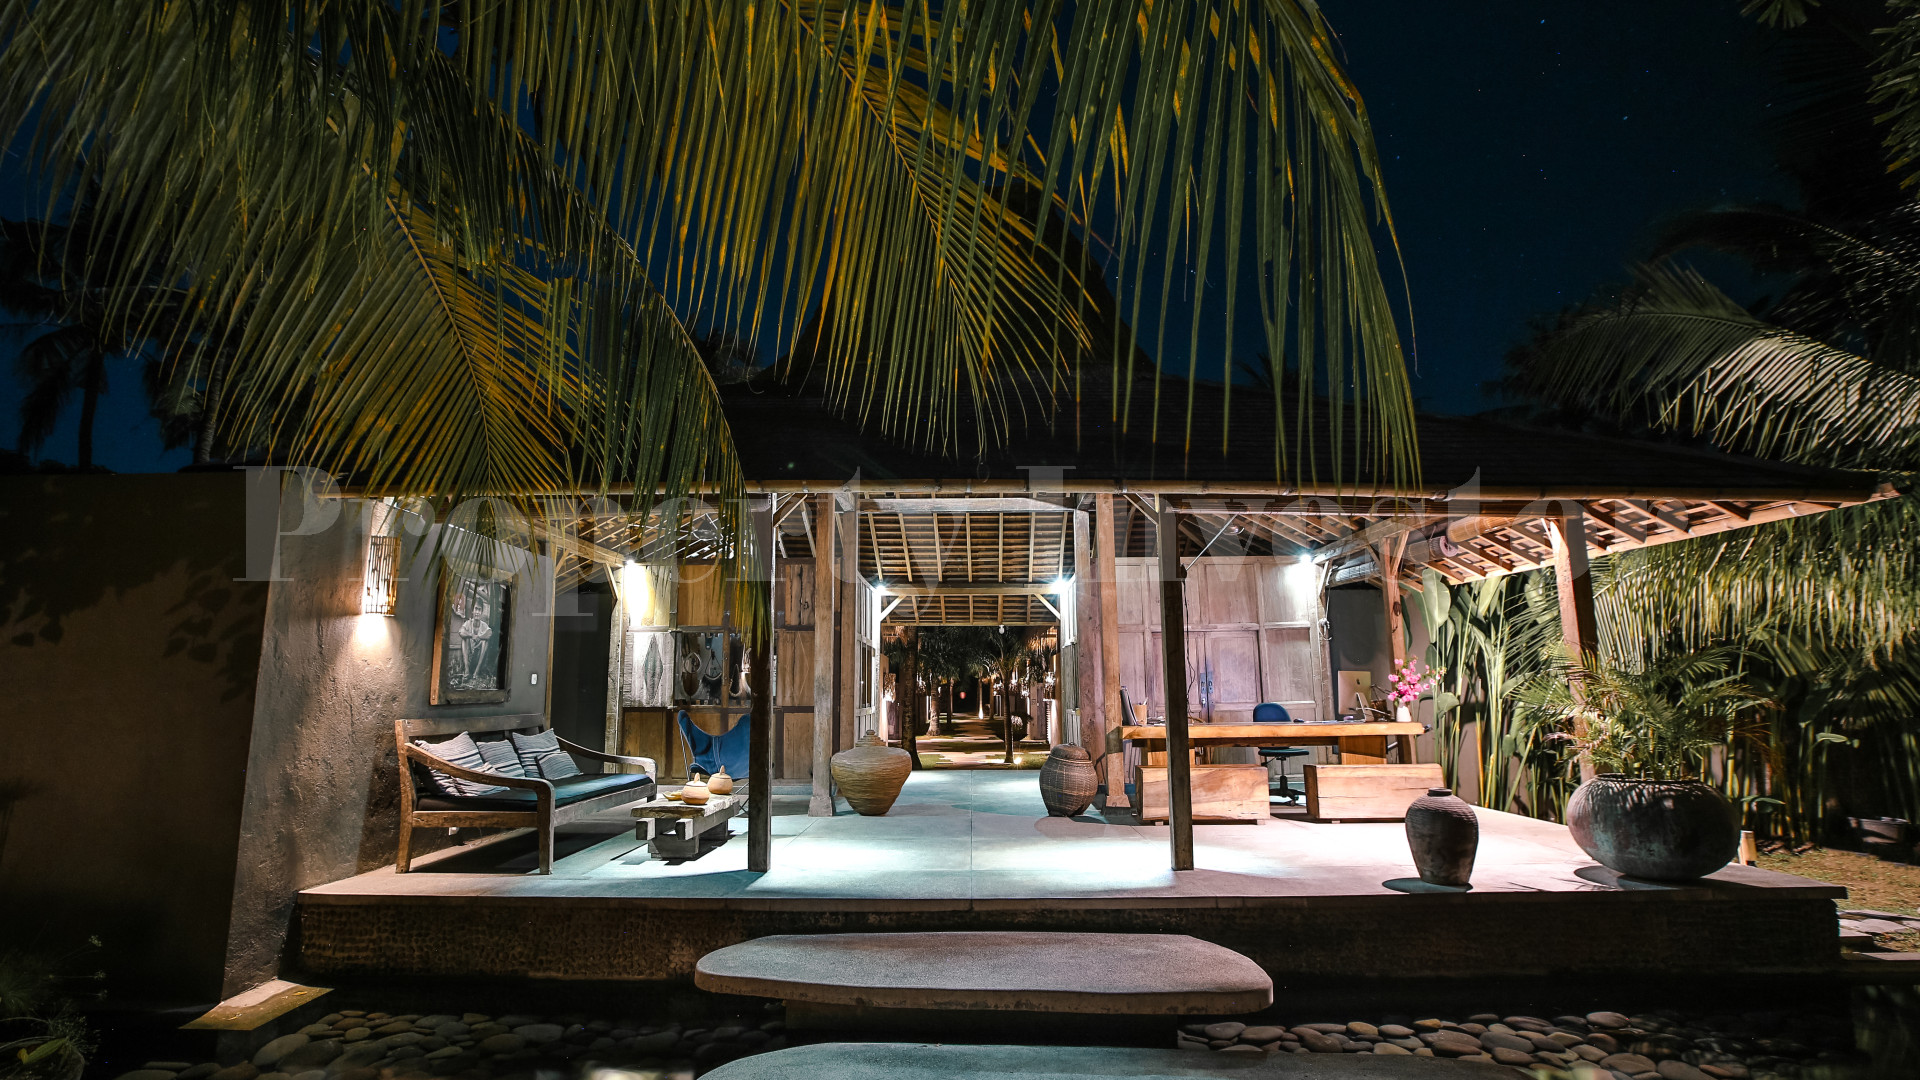 Turnkey 5* Star Boutique Hotel with 10 Modern Villas in the Gili Islands, Lombok